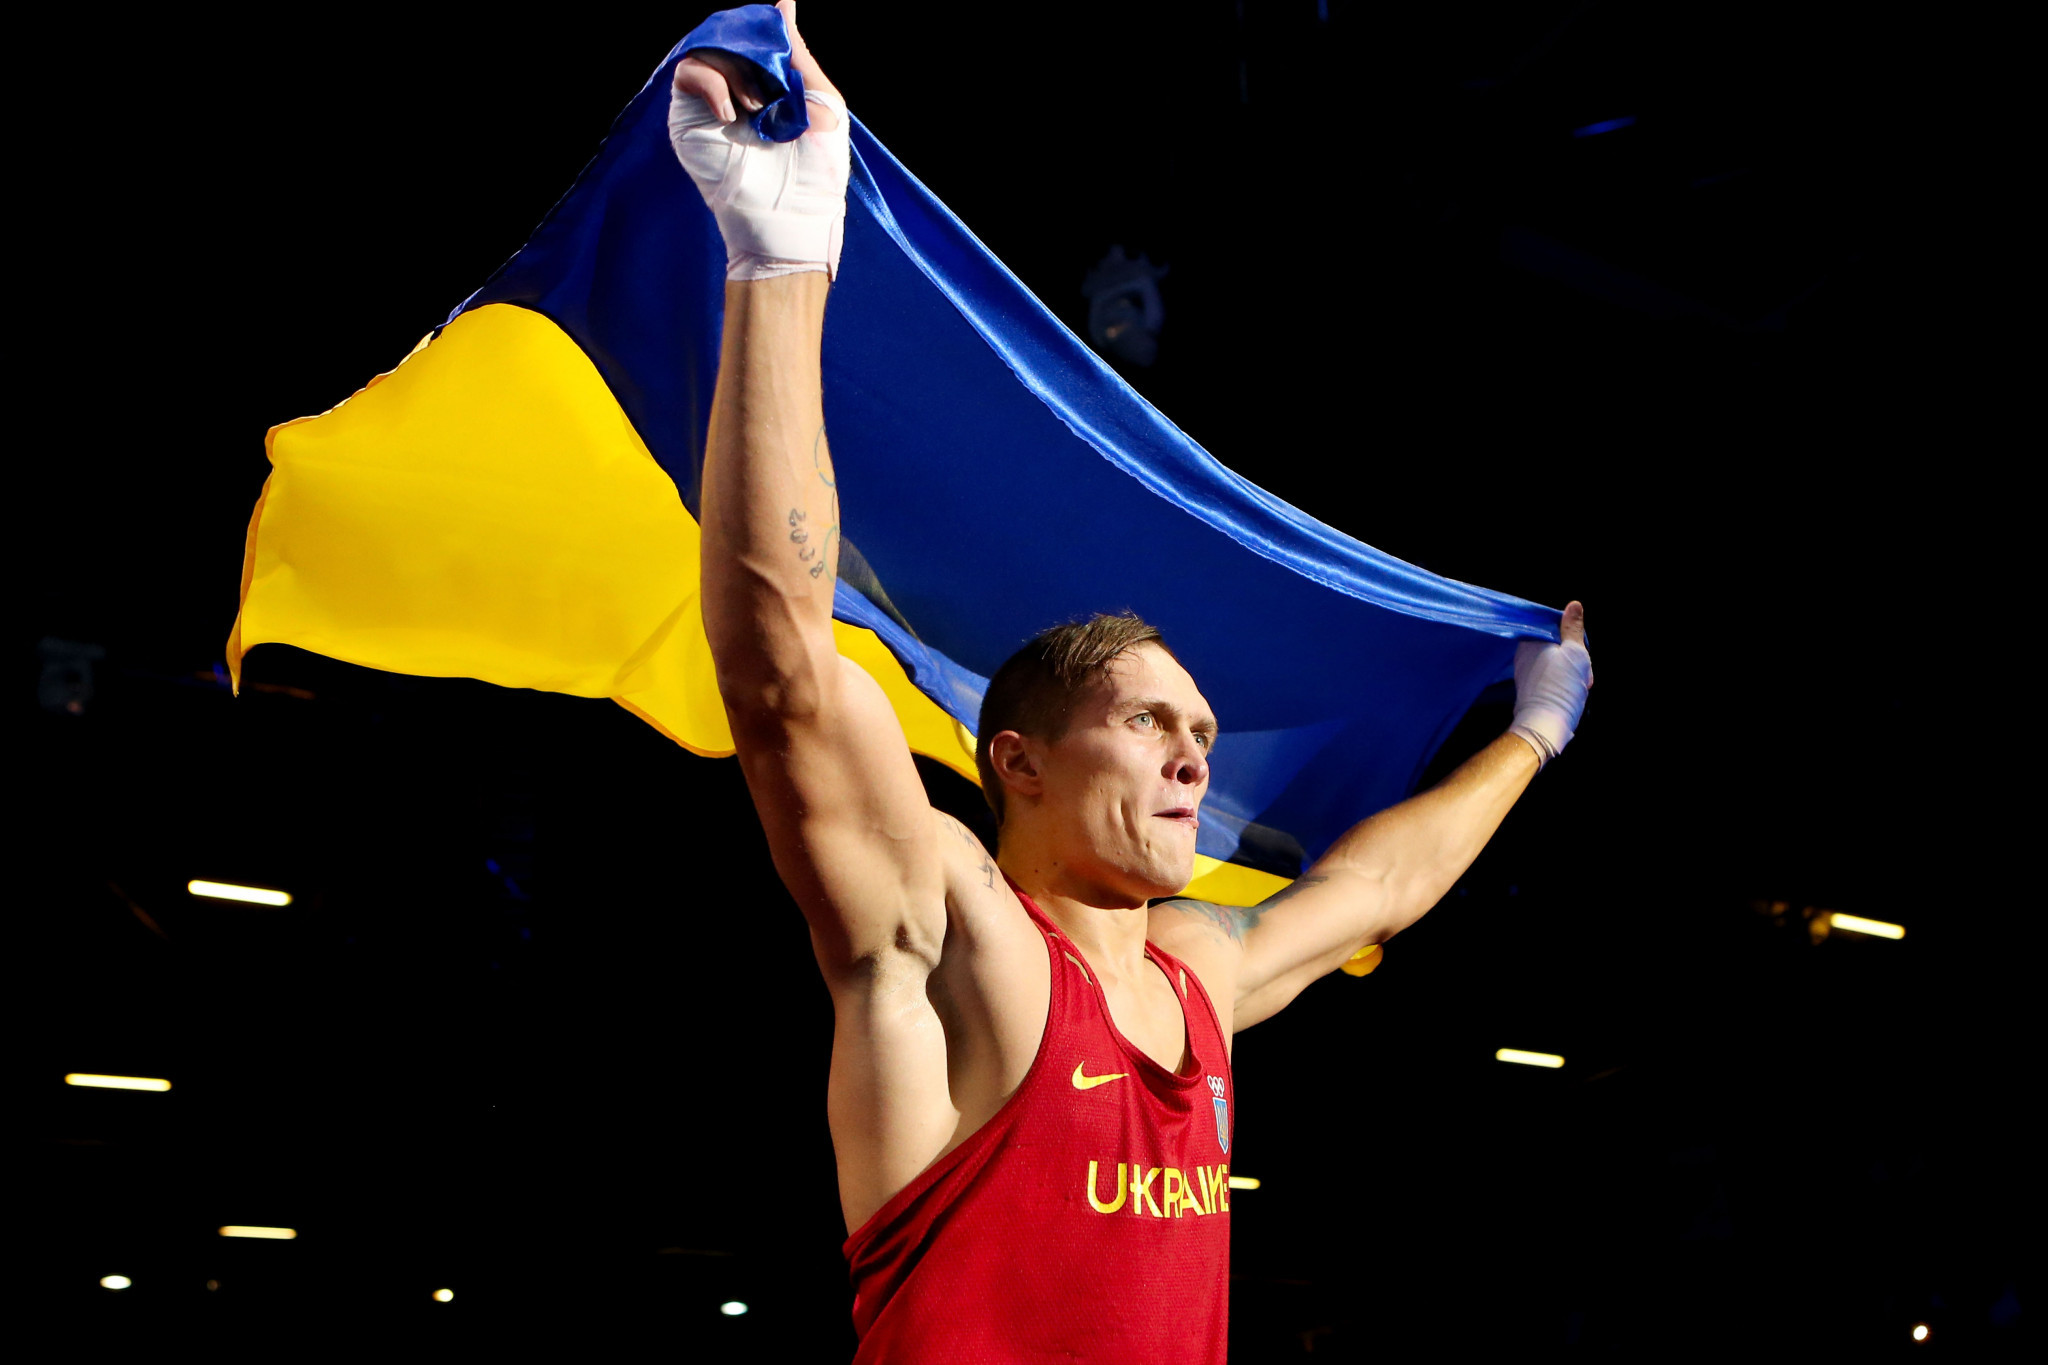 Usyk claims injured soldiers asked him to fight Joshua in rematch for Ukraine